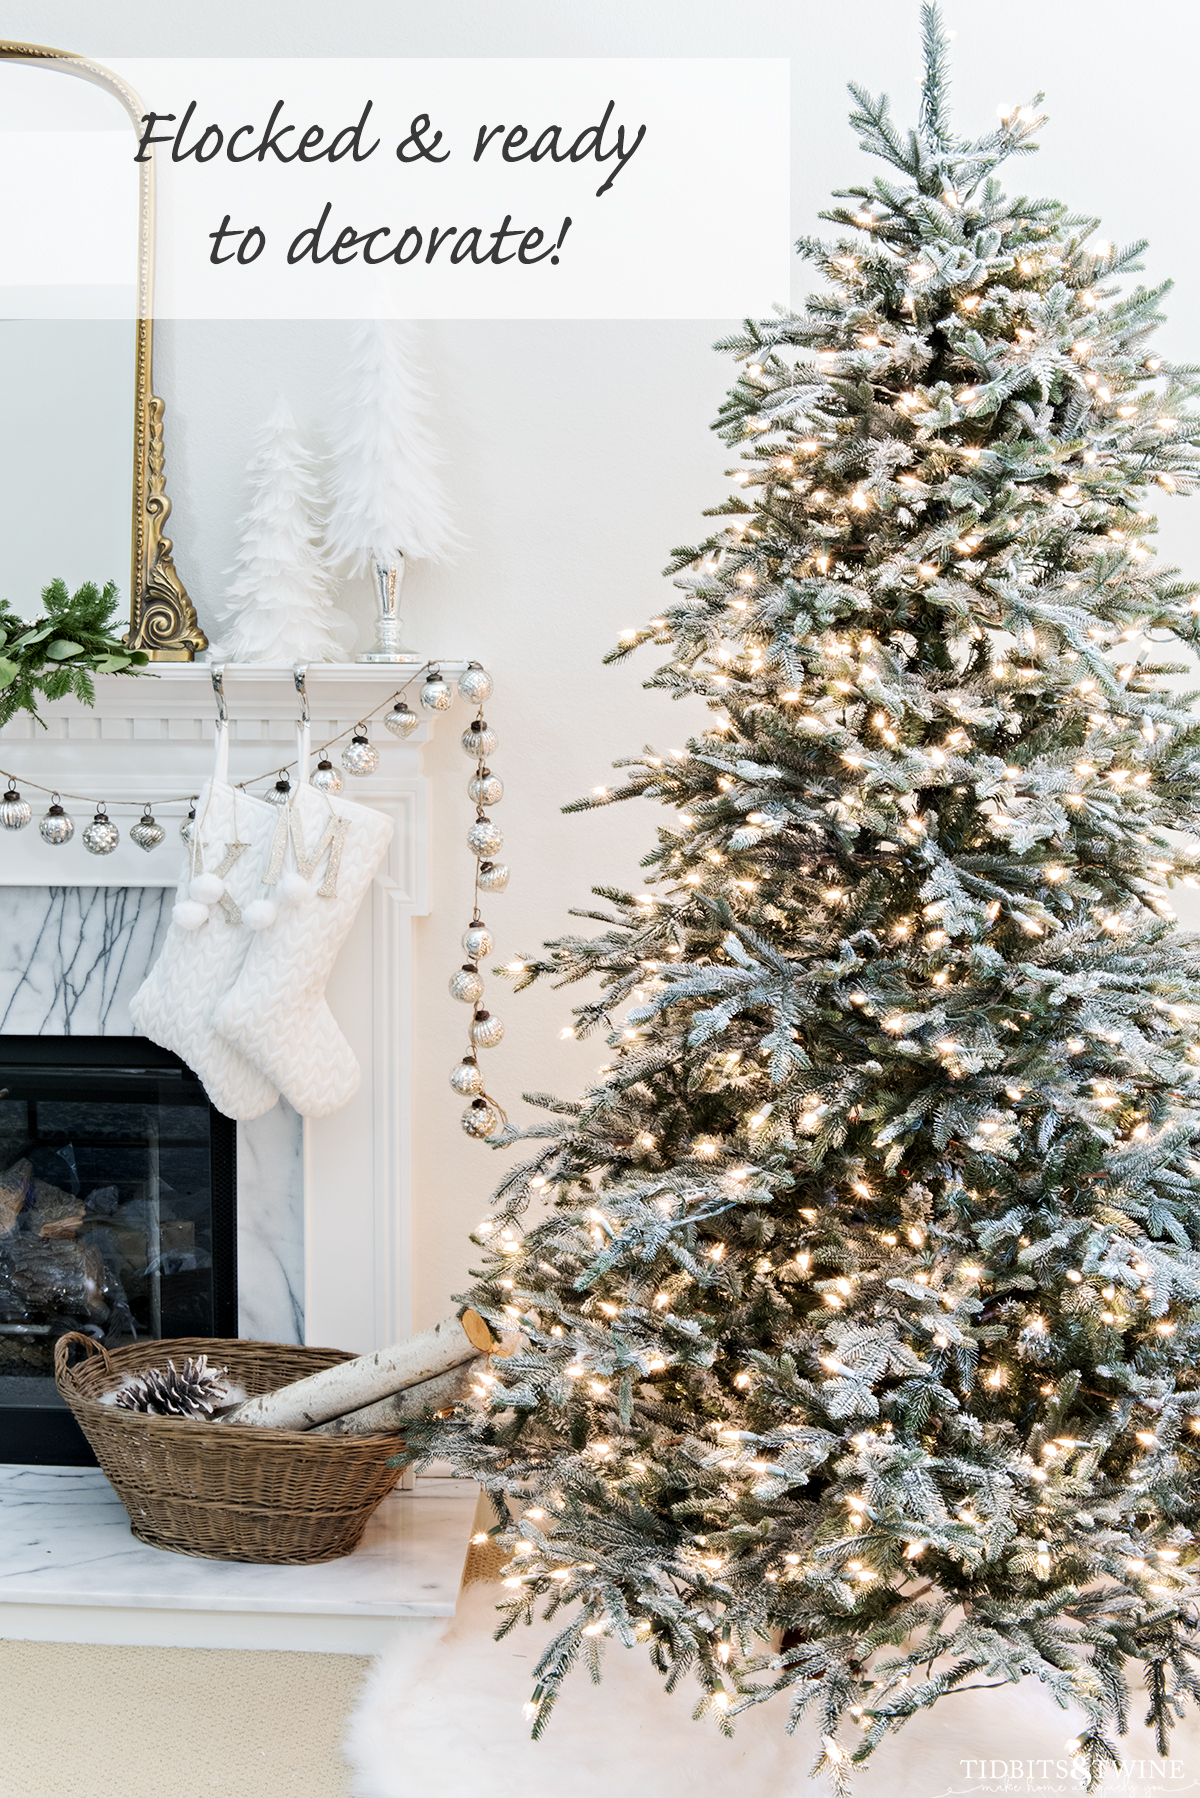 lightly flocked christmas tree ready to decorate next to fireplace in living room